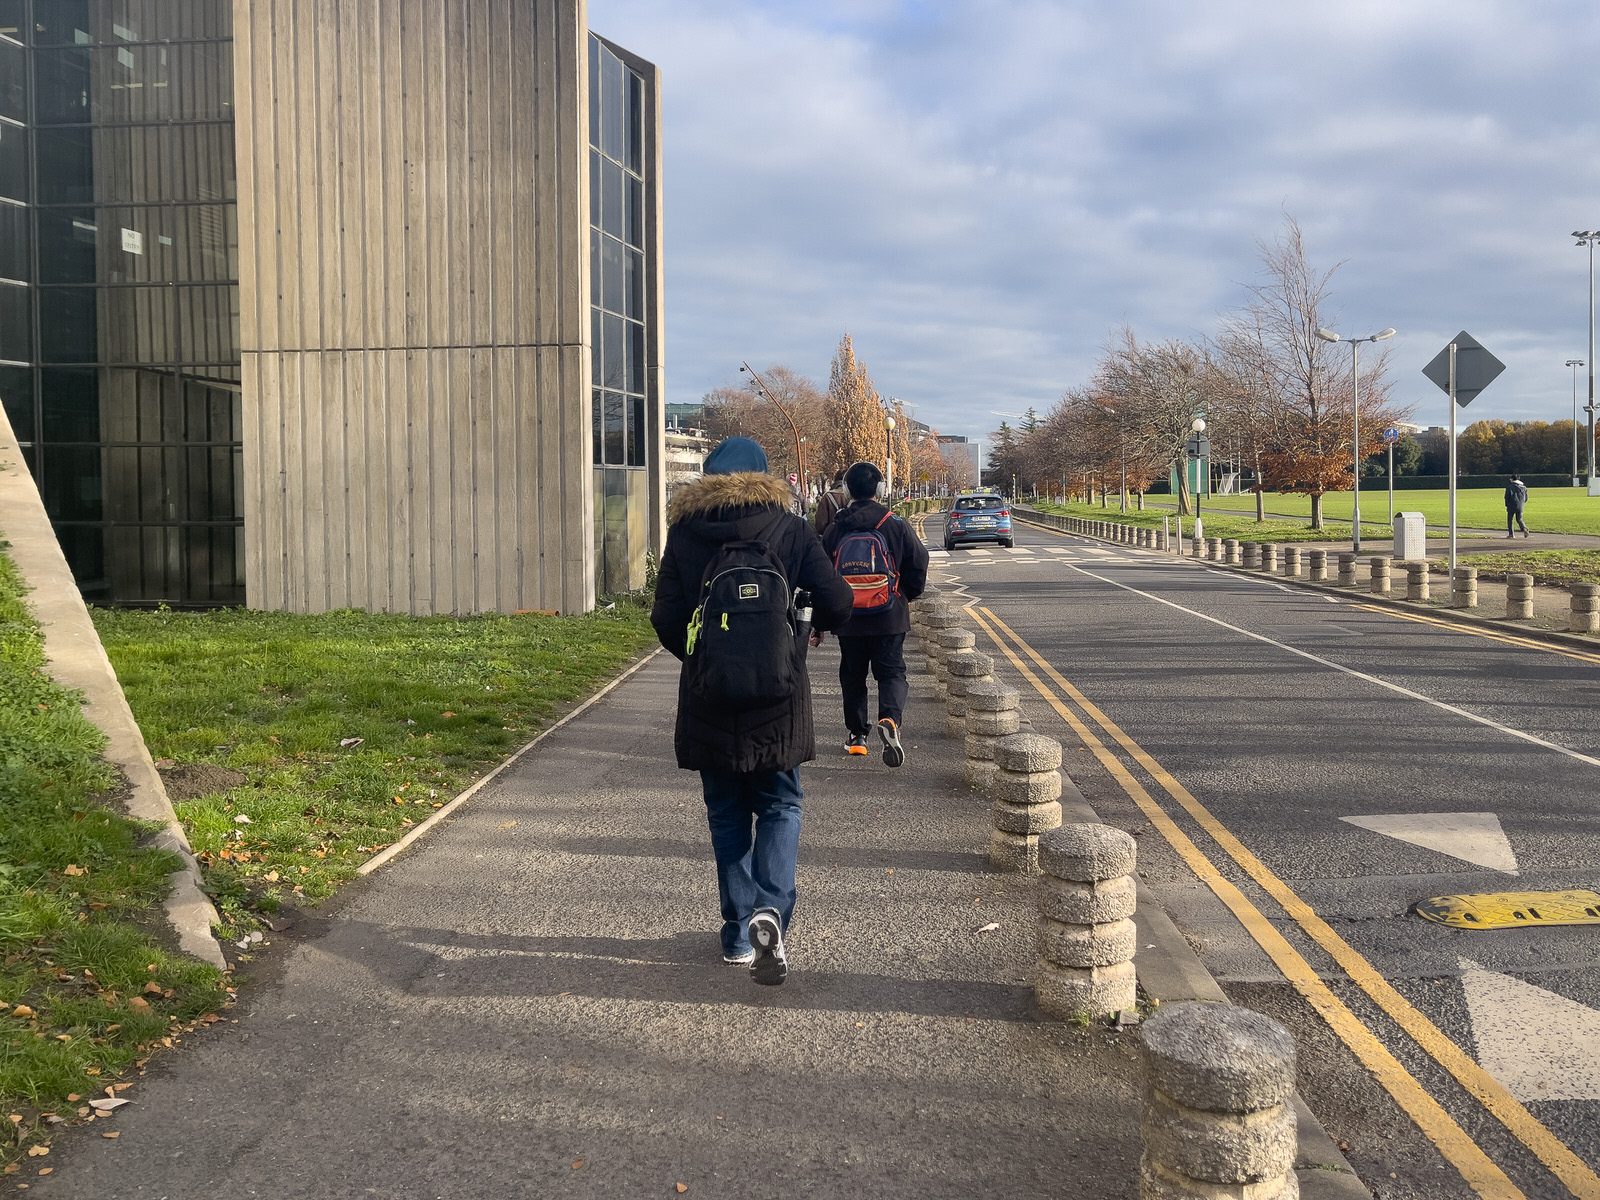 MY FIRST DAY WITHOUT THE 17 BUS SERVICE [WALK FROM S4 BUS STOP IN UCD TO ROEBUCK ROAD]-225558-1